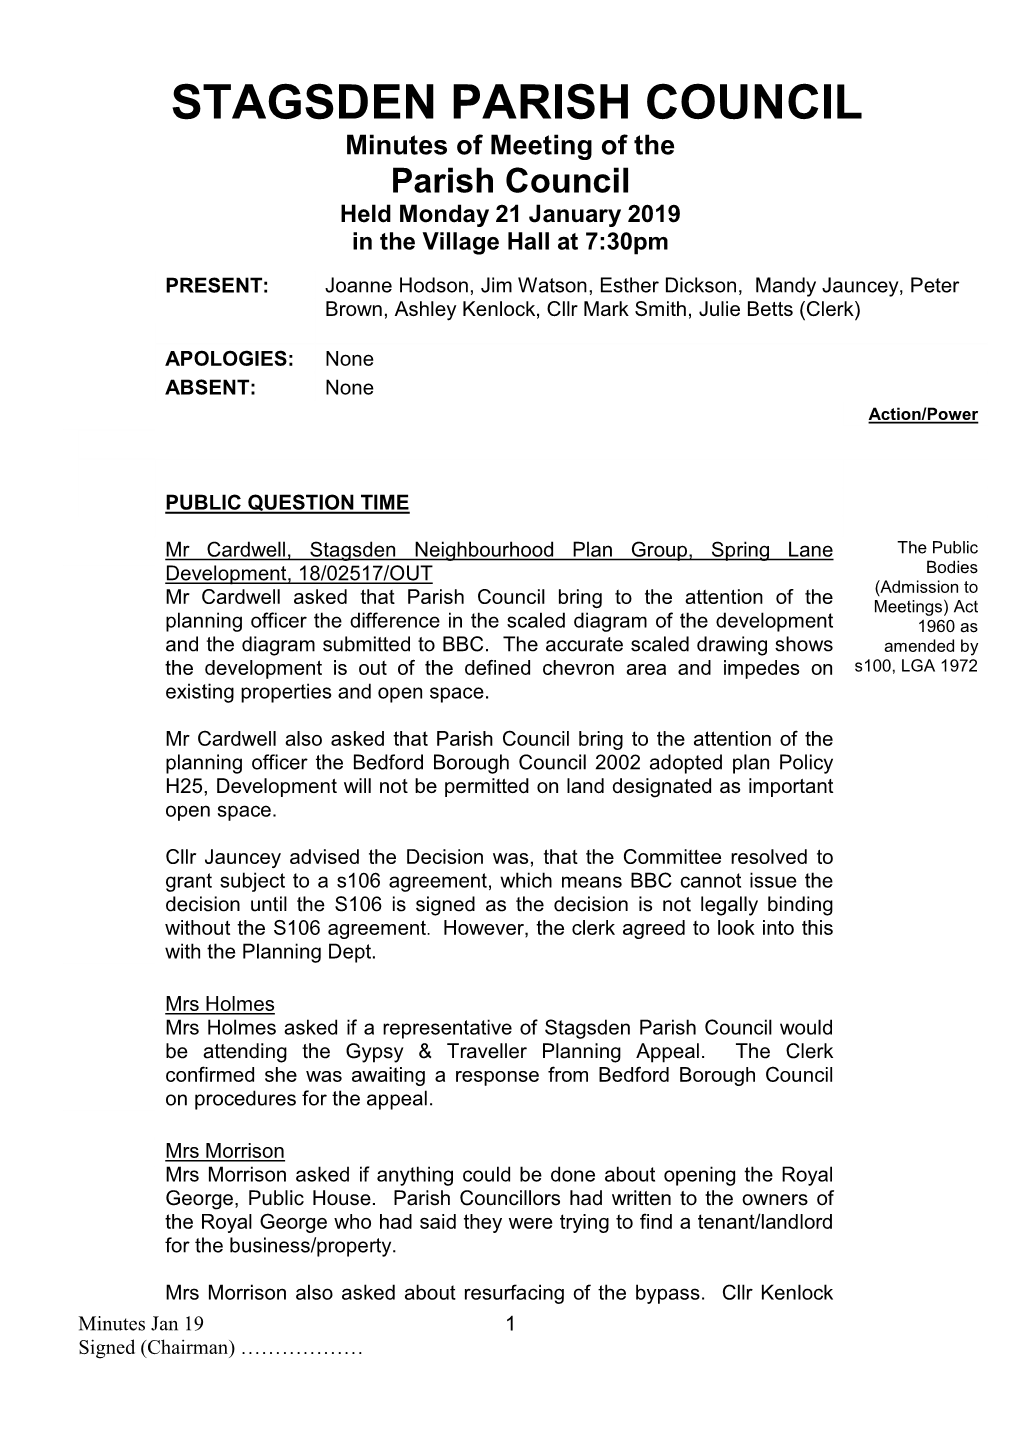 STAGSDEN PARISH COUNCIL Minutes of Meeting of the Parish Council Held Monday 21 January 2019 in the Village Hall at 7:30Pm